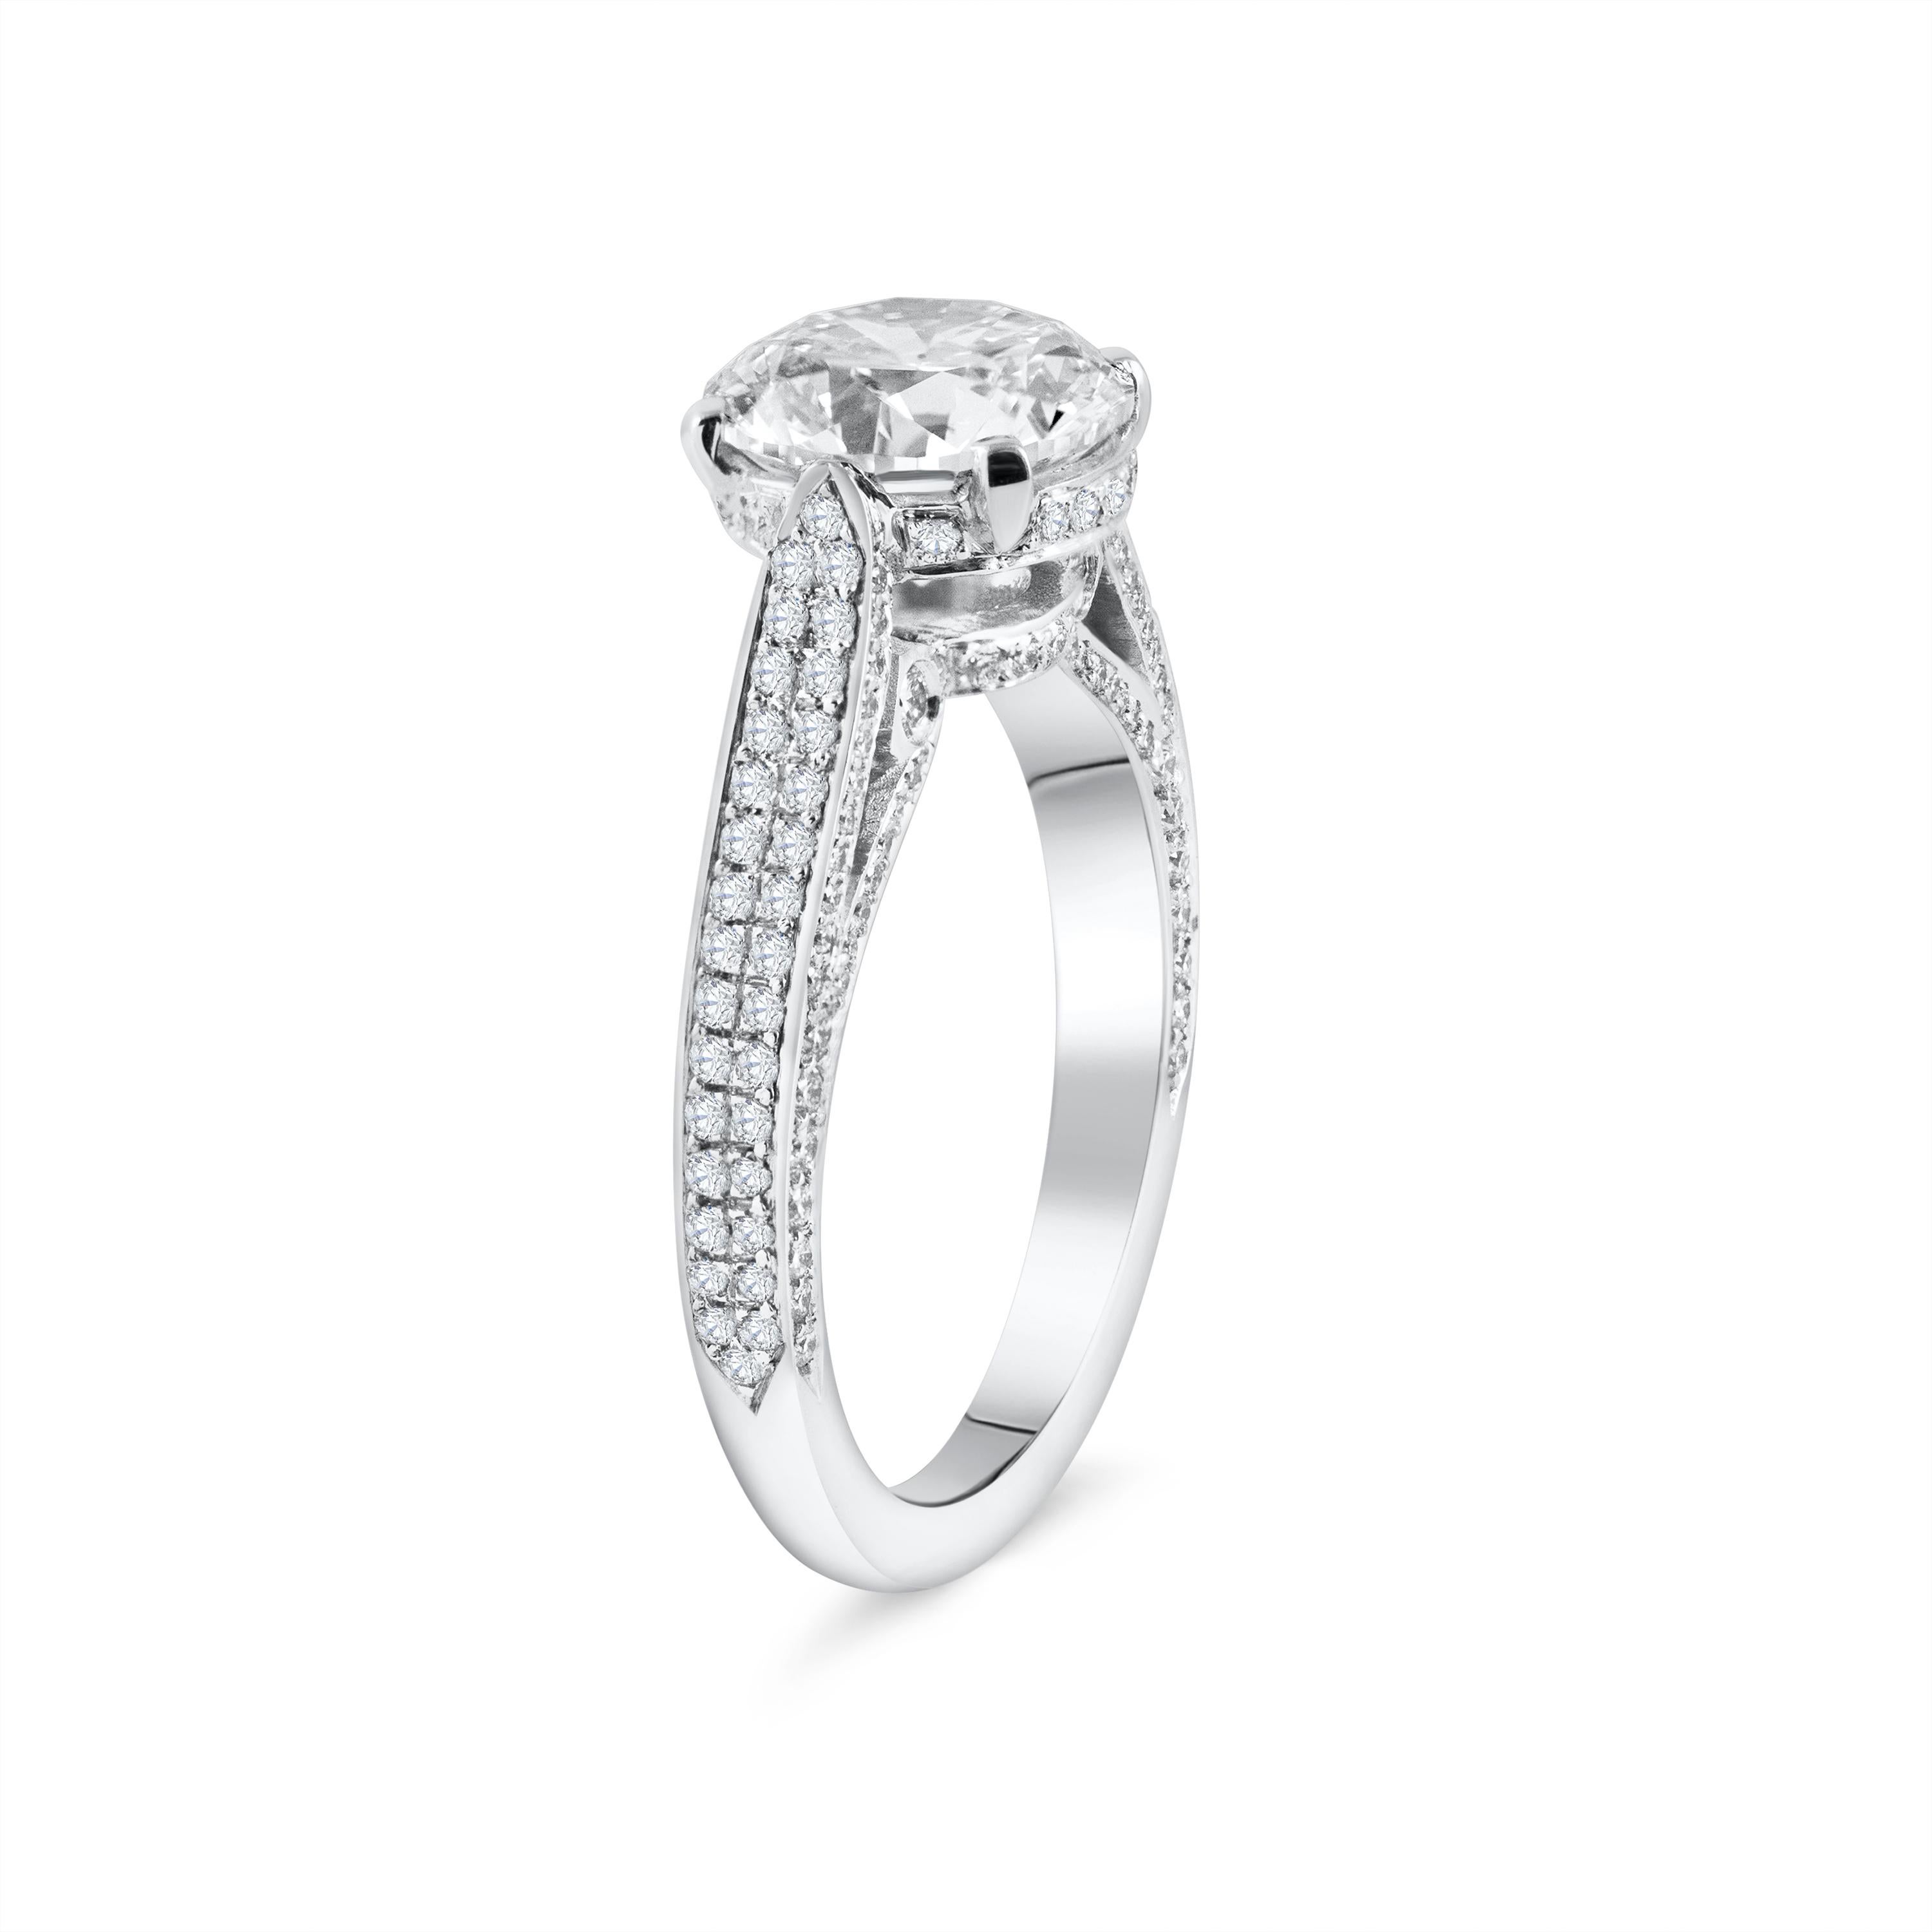 An absolutely gorgeous piece! Set with a 2.75 carats round brilliant diamond center stone in a 4 prong basket. The tapered 18k white gold composition embellished with graduating round brilliant diamonds that goes half-way down the shank of the ring.